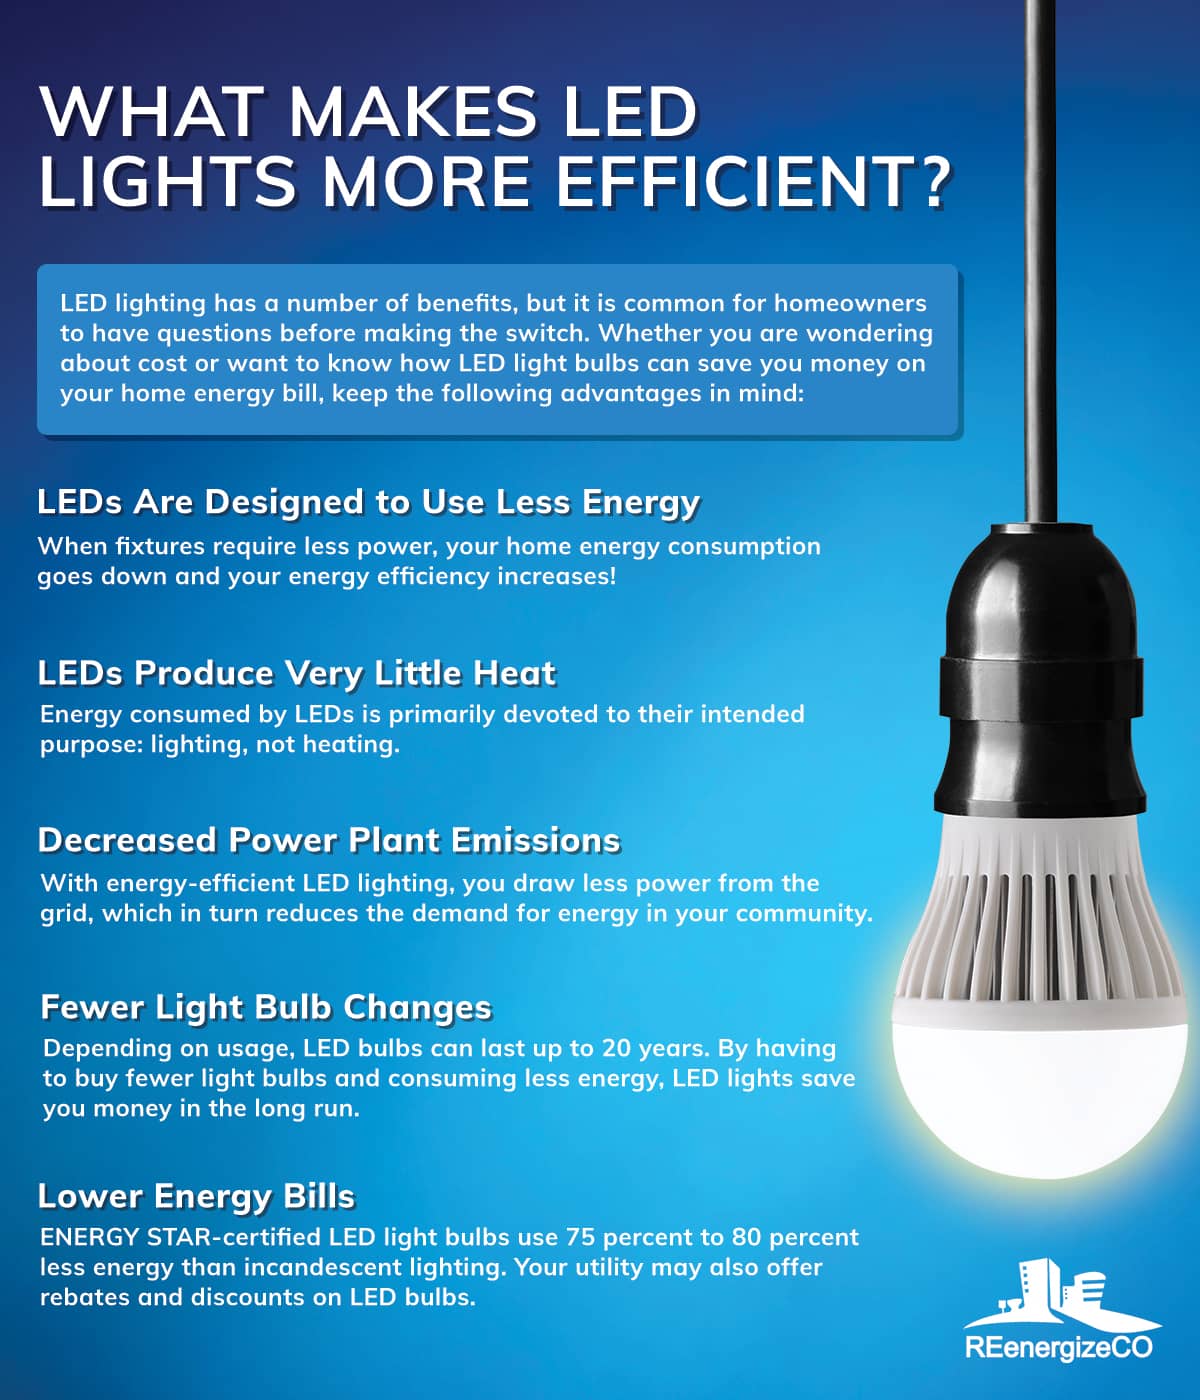 How LED Lights Are More Efficient Than Other Light Bulbs